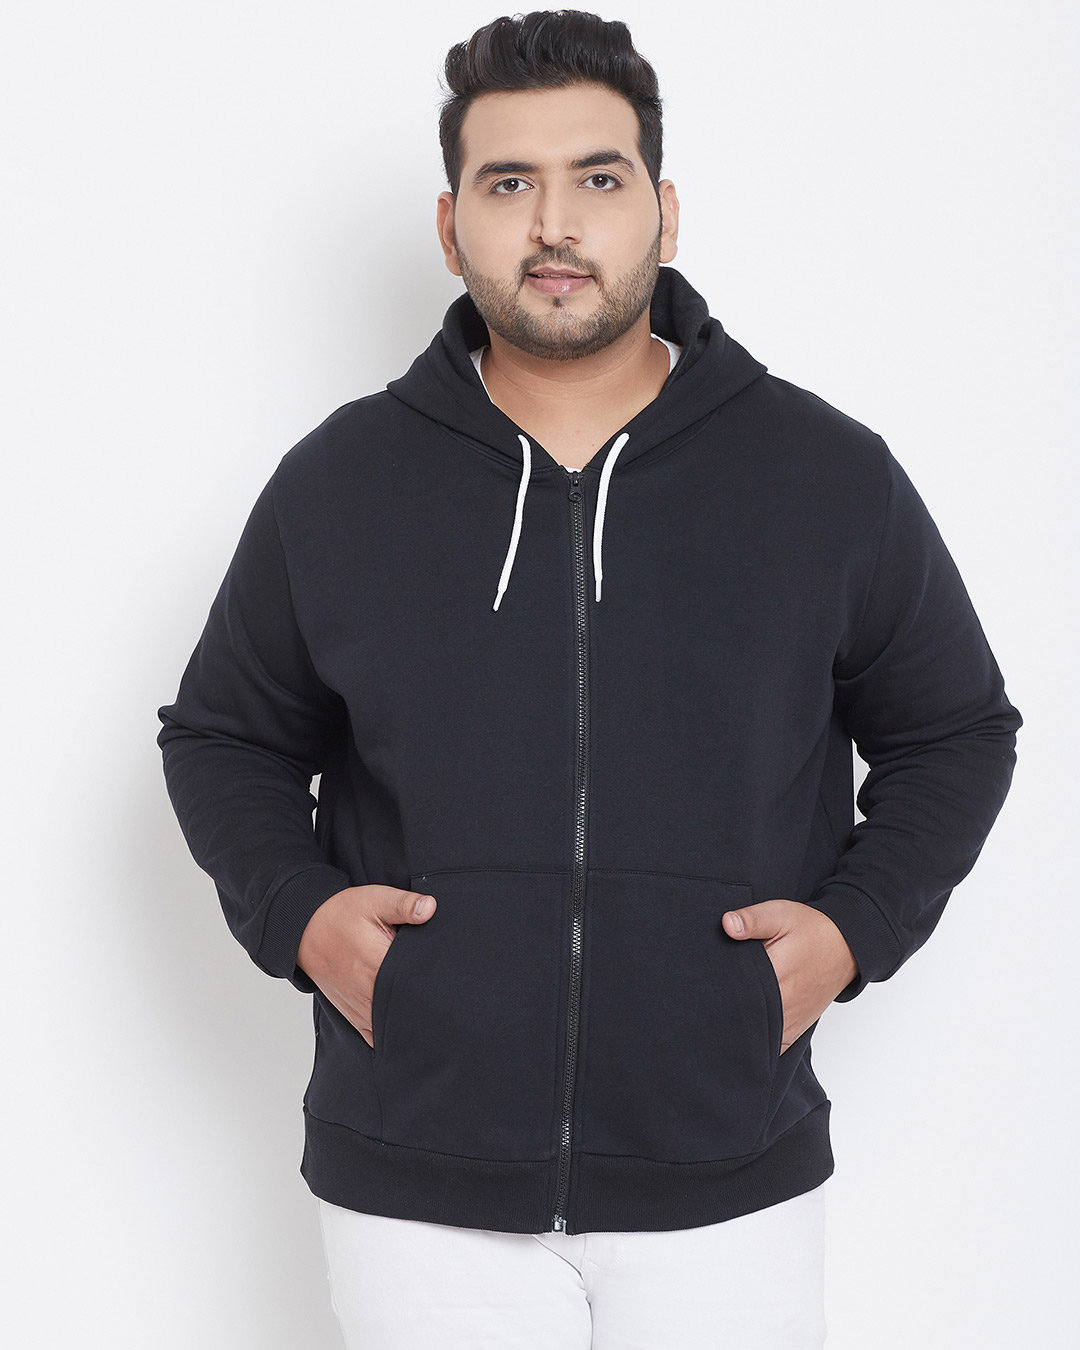 Buy Instafab Plus Men's Plus Size Solid Stylish Casual Winter Hooded ...